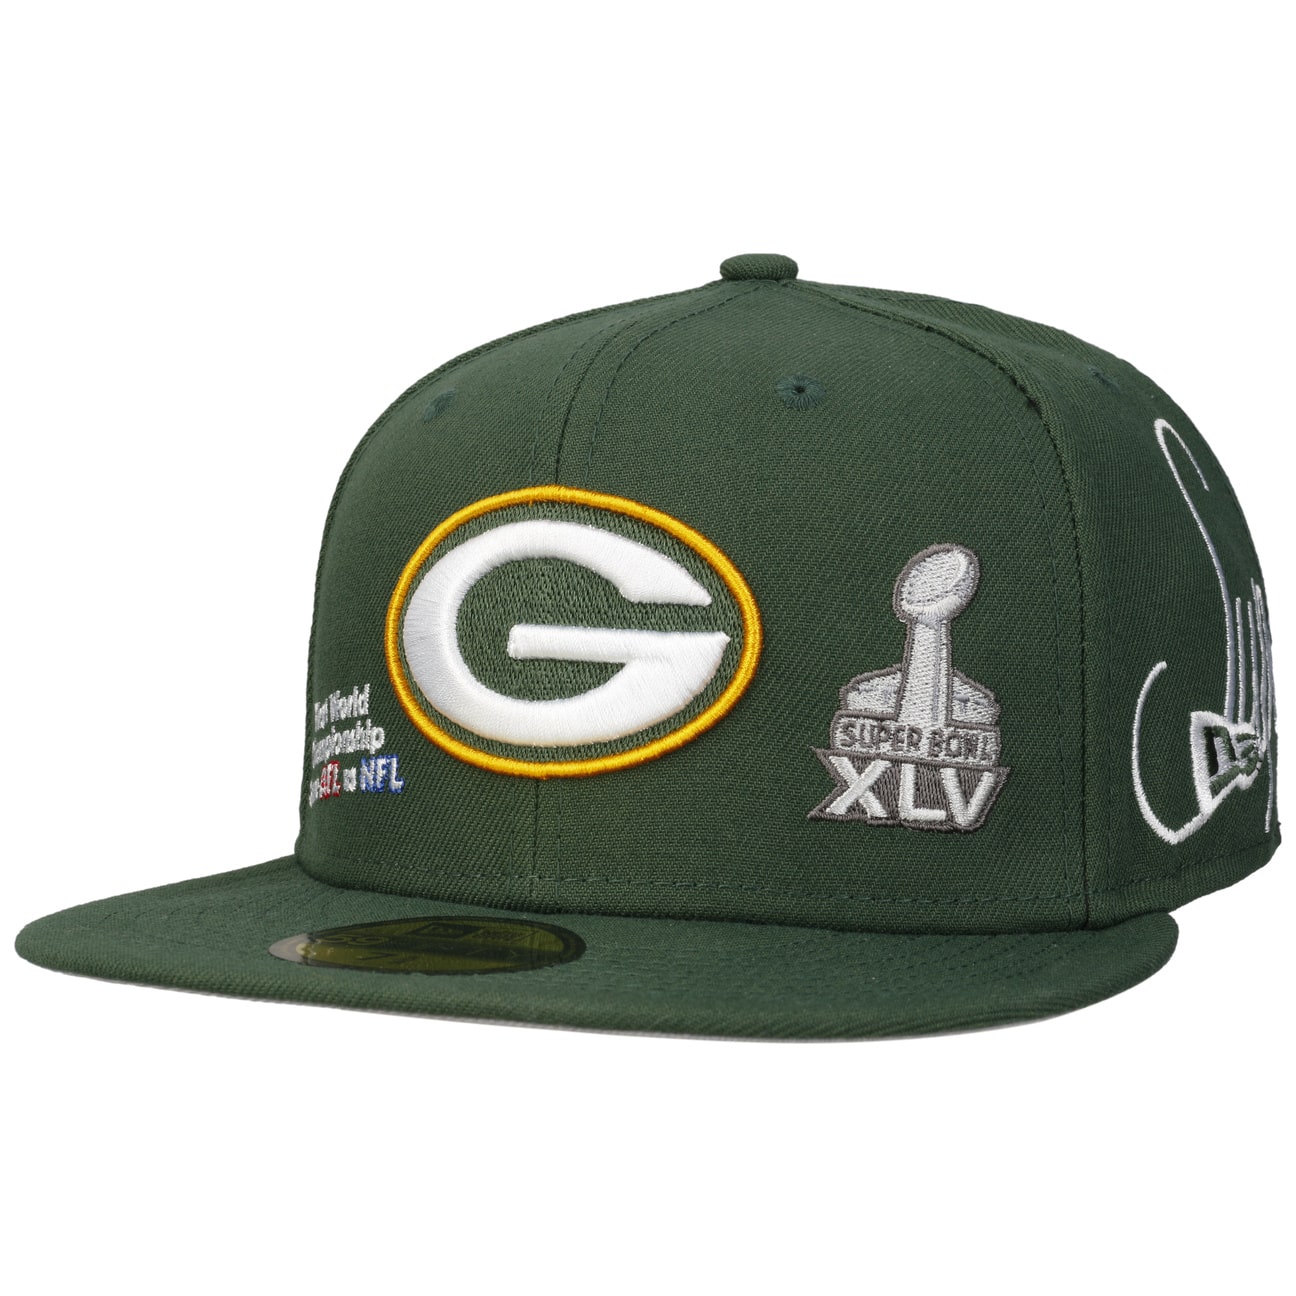 59Fifty Packers Super Bowl XLV Keps by New Era